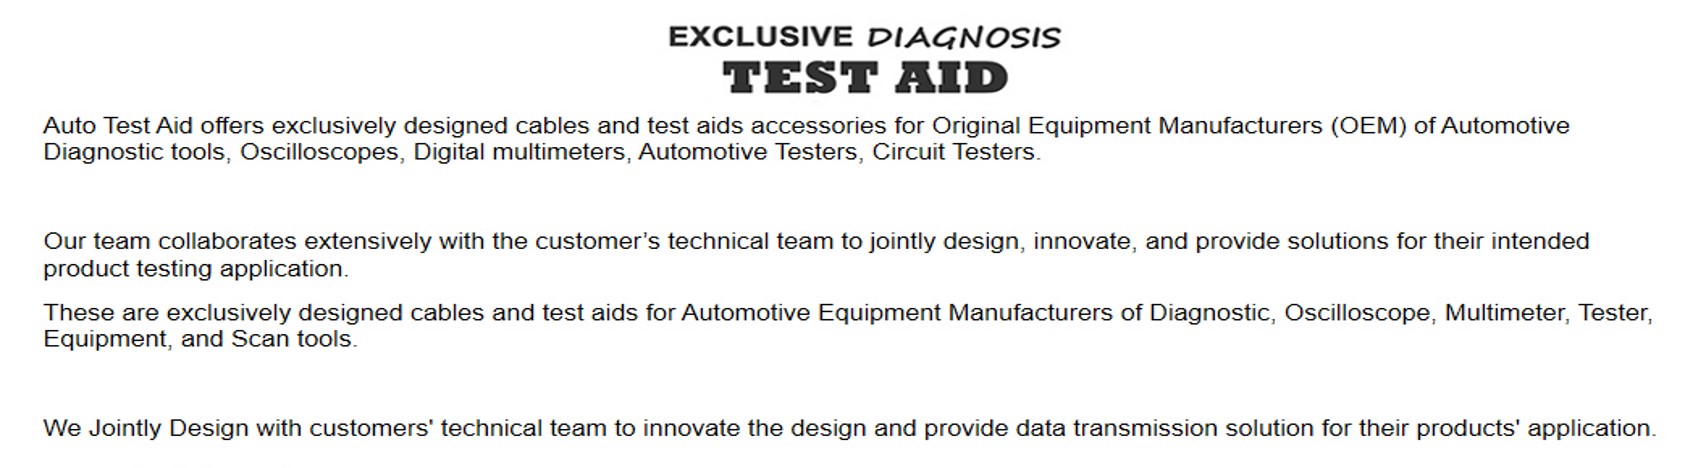 EXCLUSIVE TEST AID